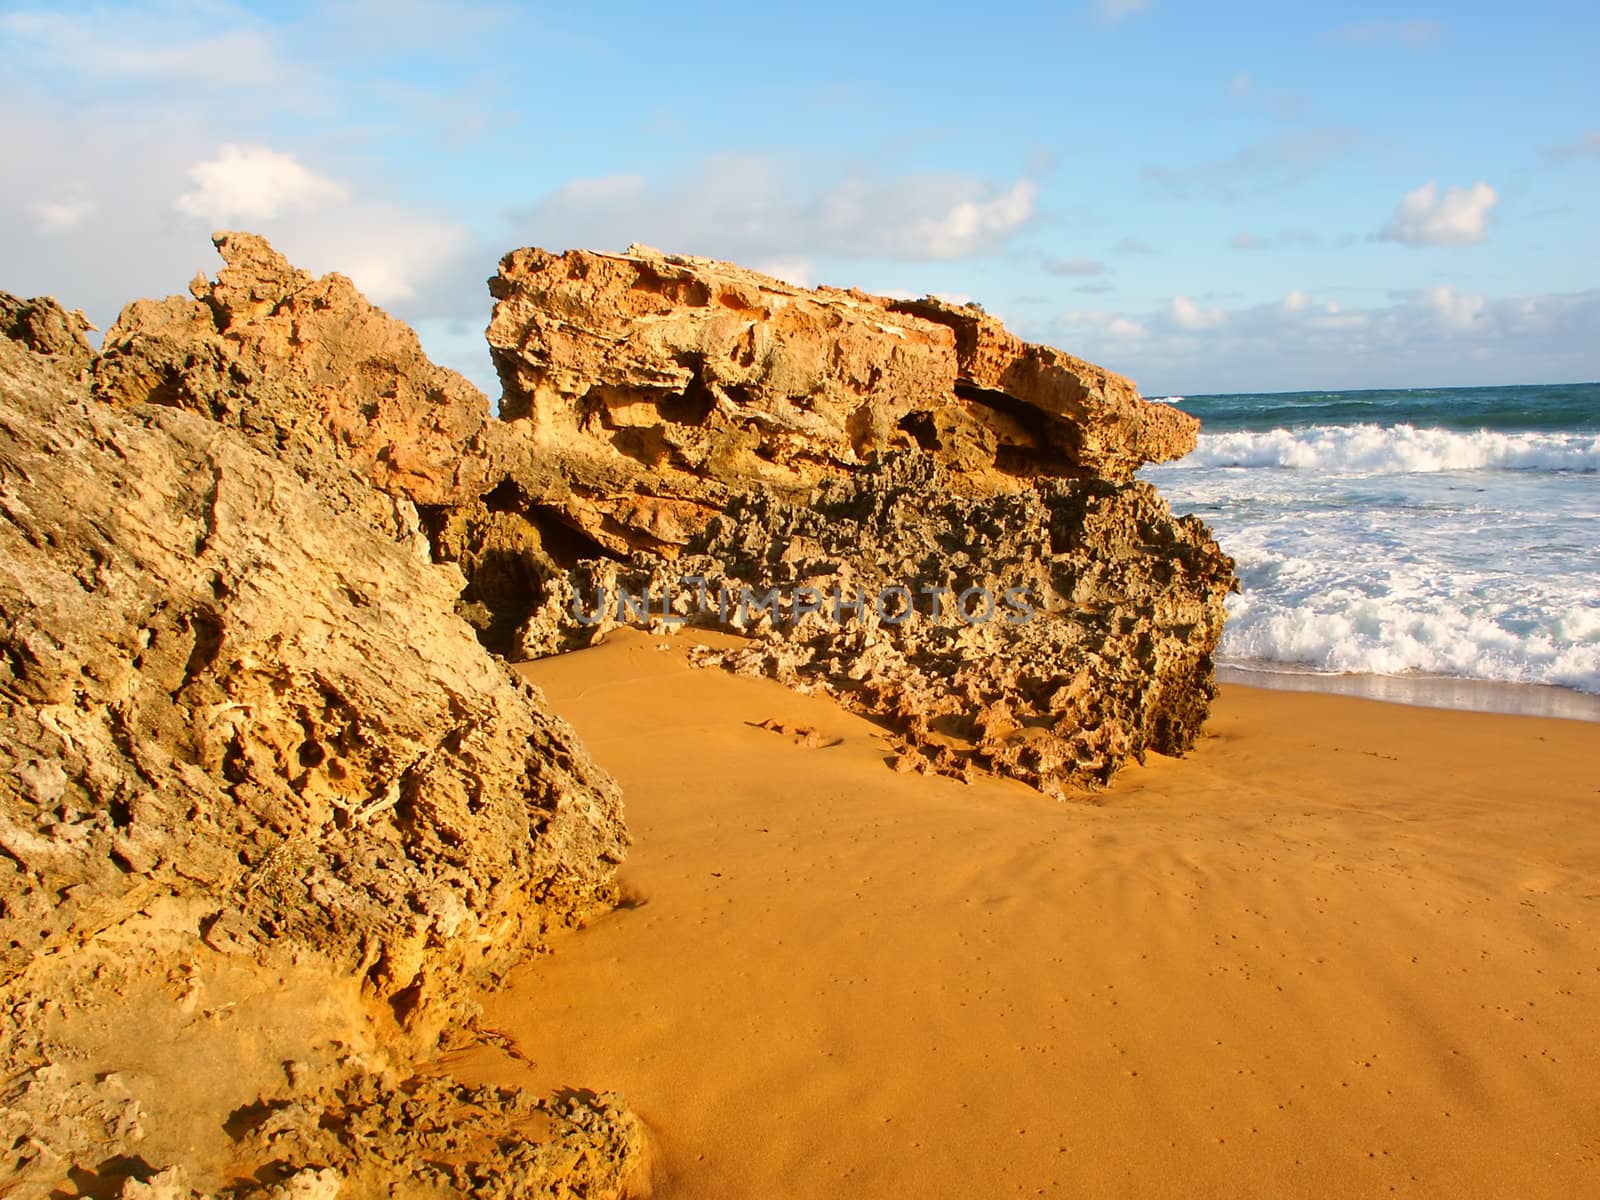 Rugged rocks jut out of the beach along the southern coast of Victoria, Australia.